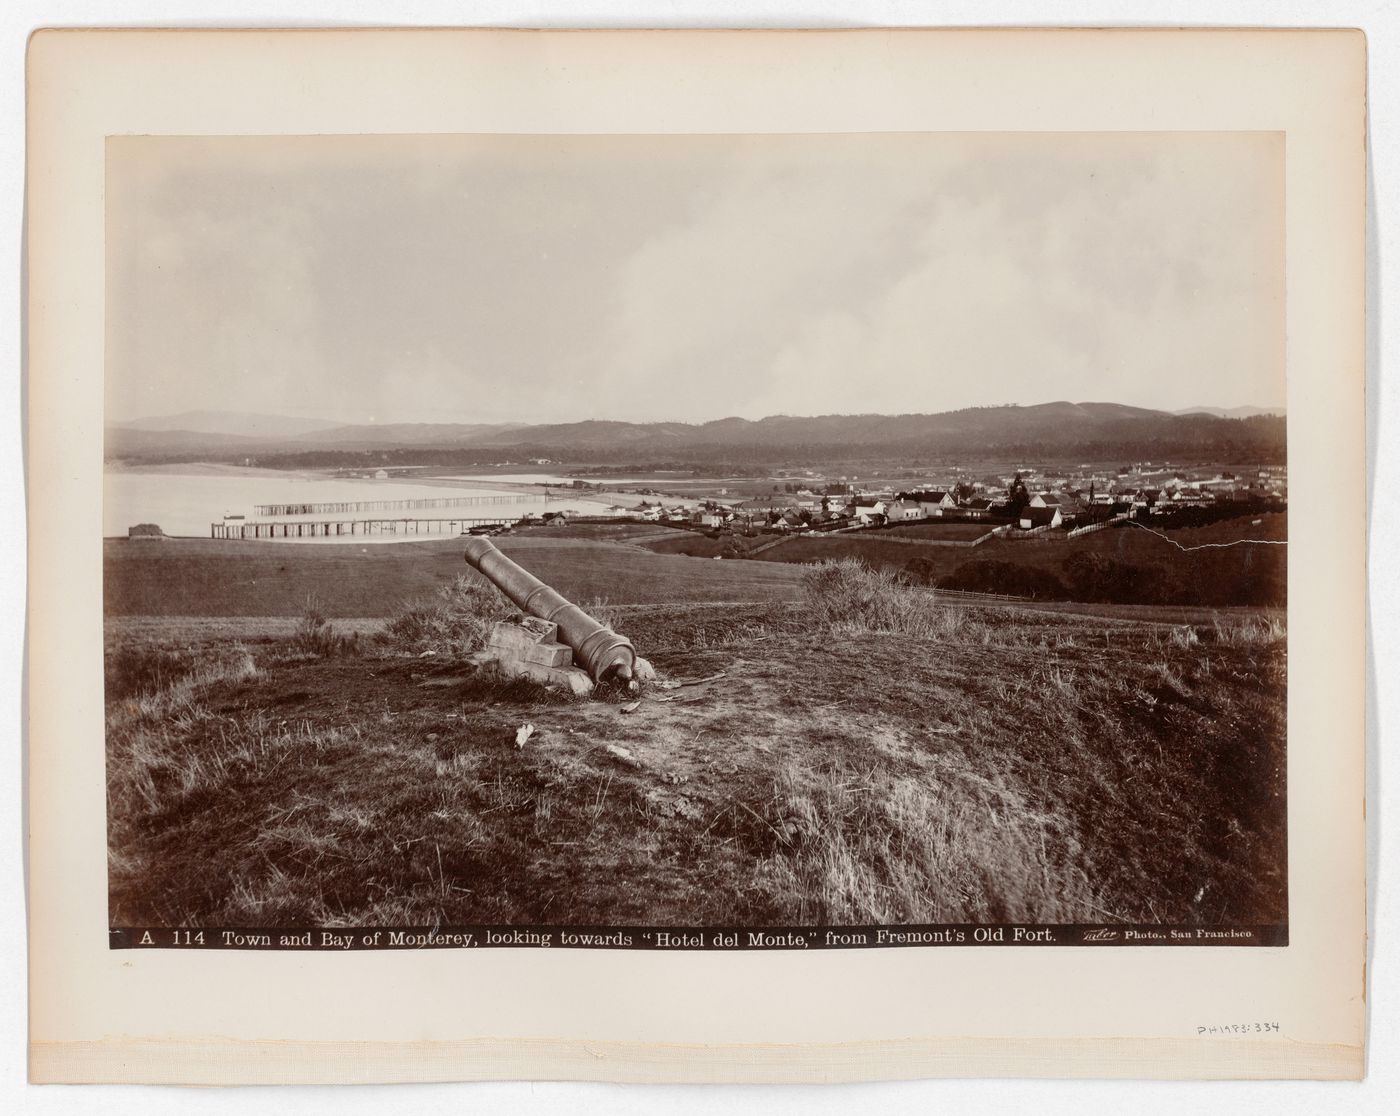 Town and Bay of Monterey, looking towards "Hotel del Monte", from Fremont's 1 Old Fort